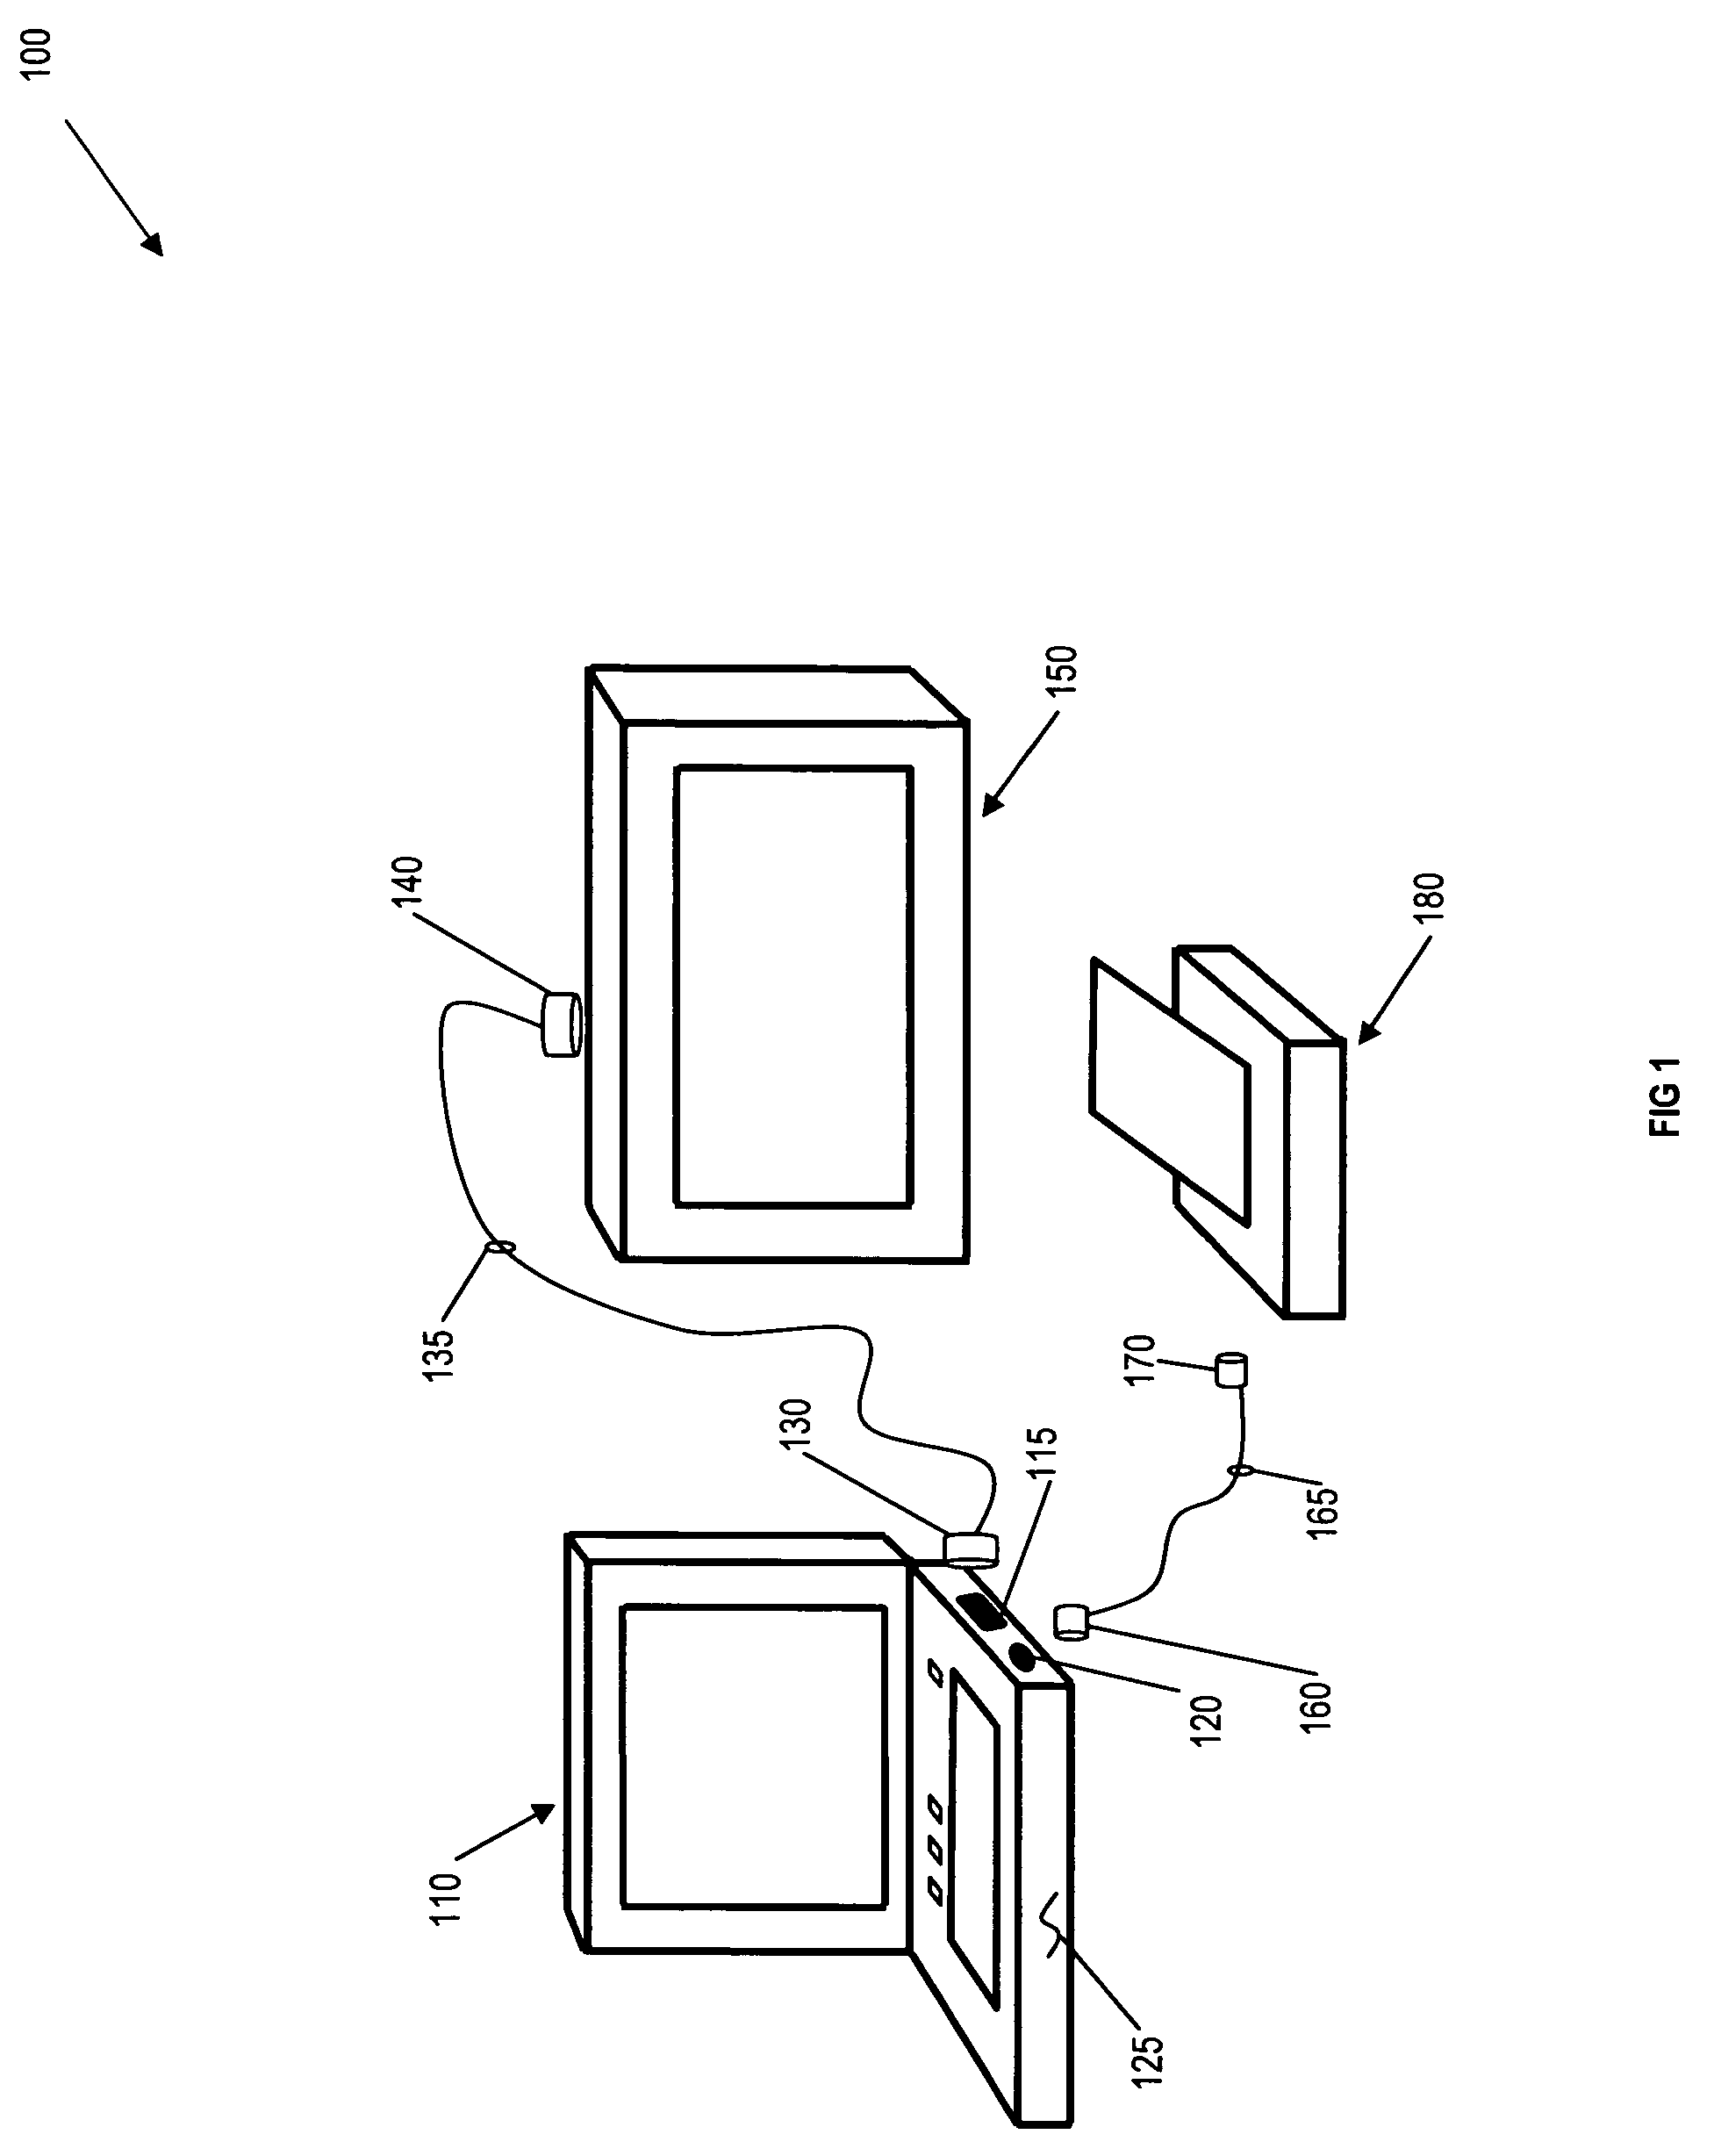 Methods and arrangements to attenuate an electrostatic charge on a cable prior to coupling the cable with an electronic system